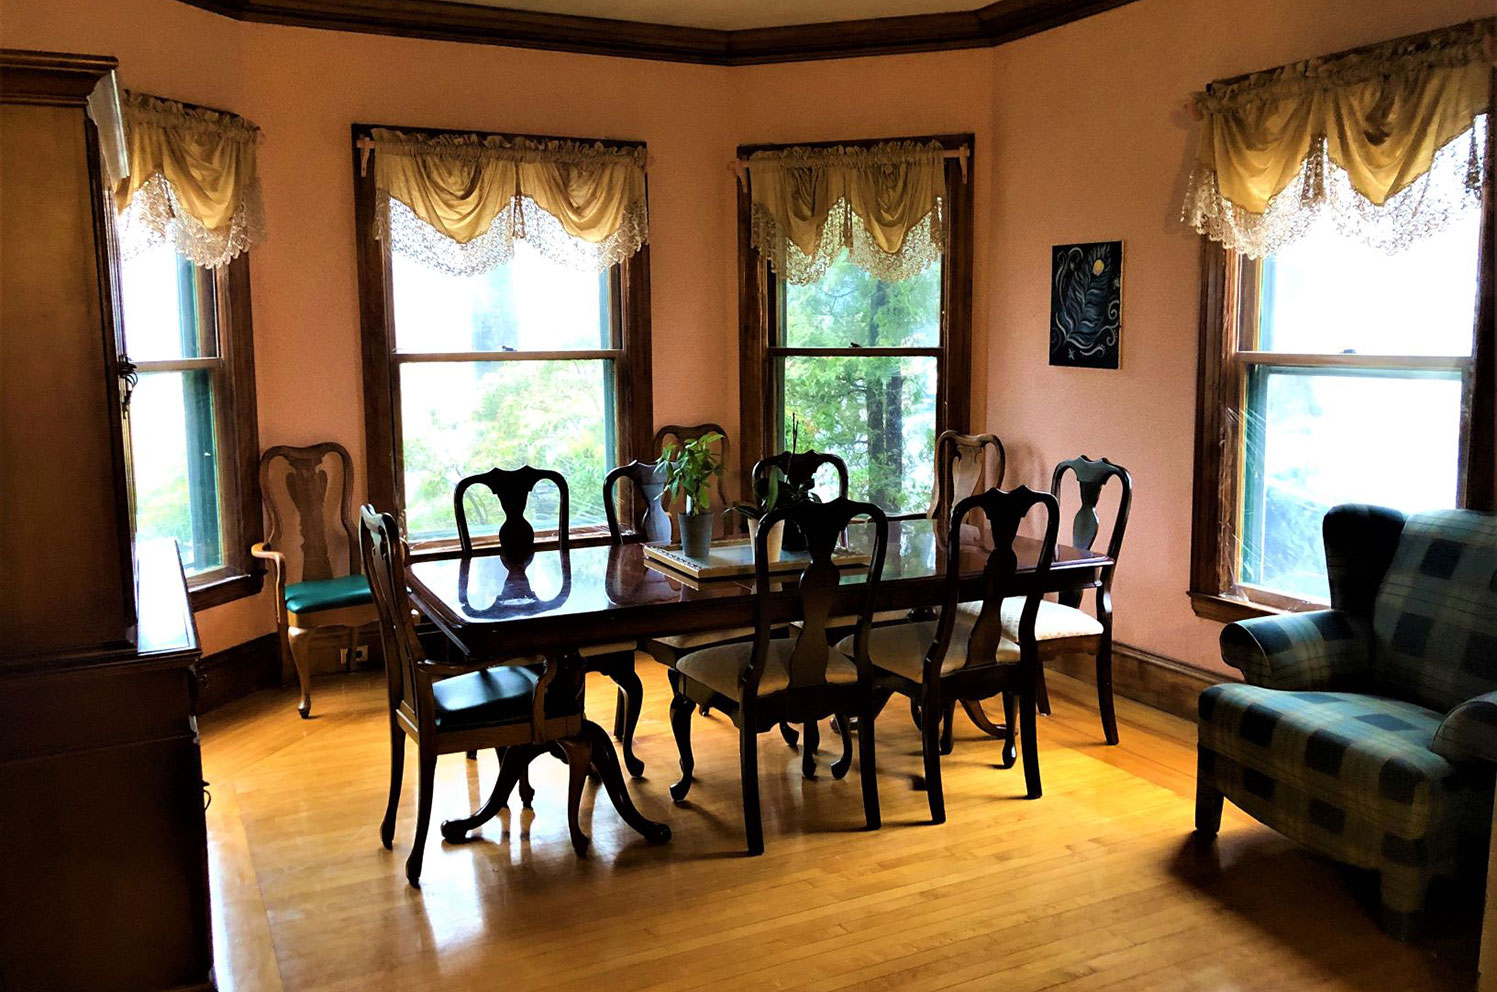 Miracles of Dignity: Germain Sober House | Sober Living for Women in Worcester, Massachusetts